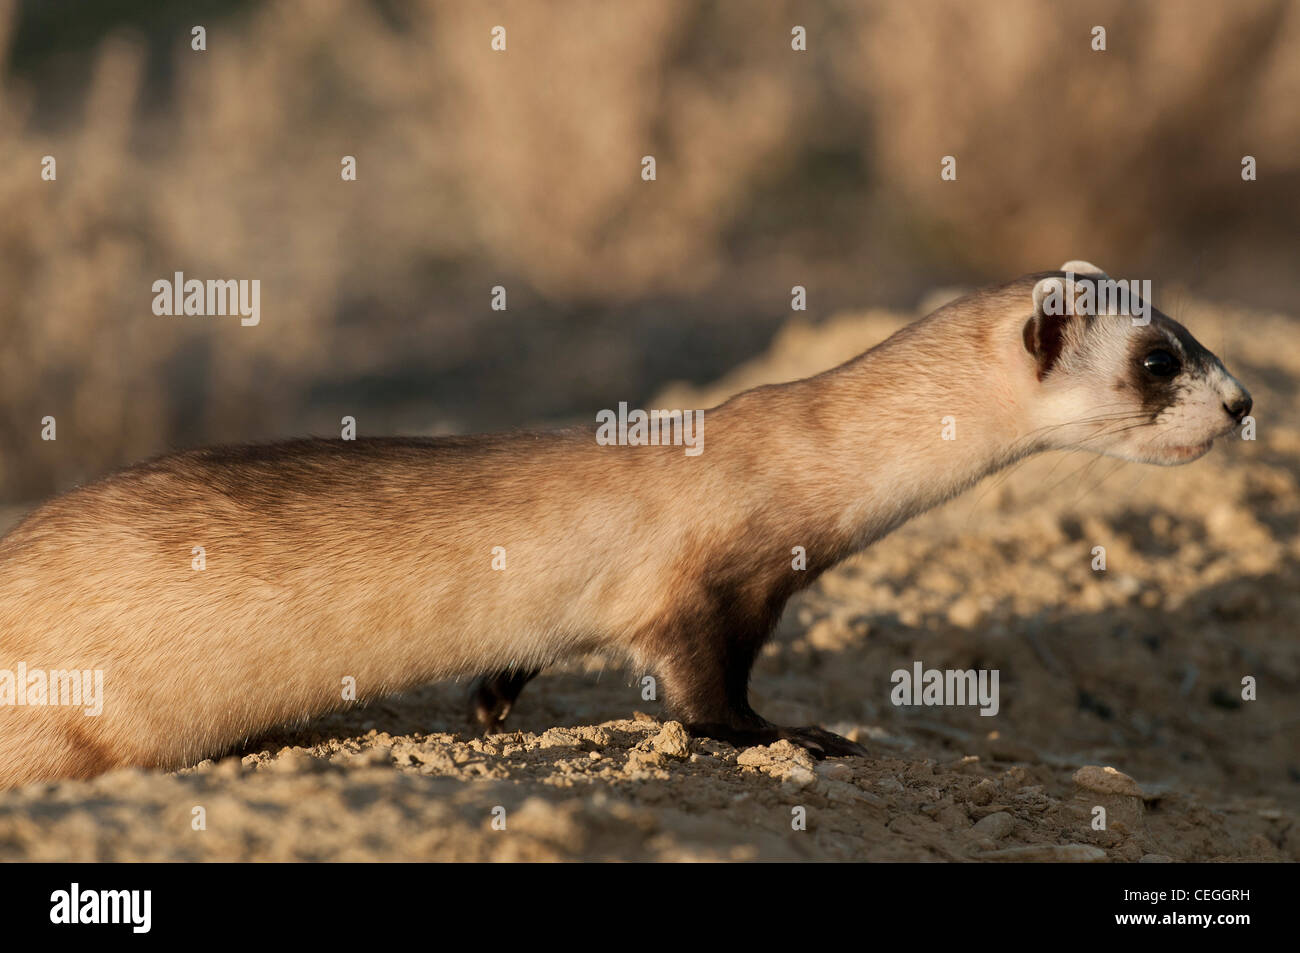 Stock photo of a wild black-footed ferret at his burrow. Stock Photo